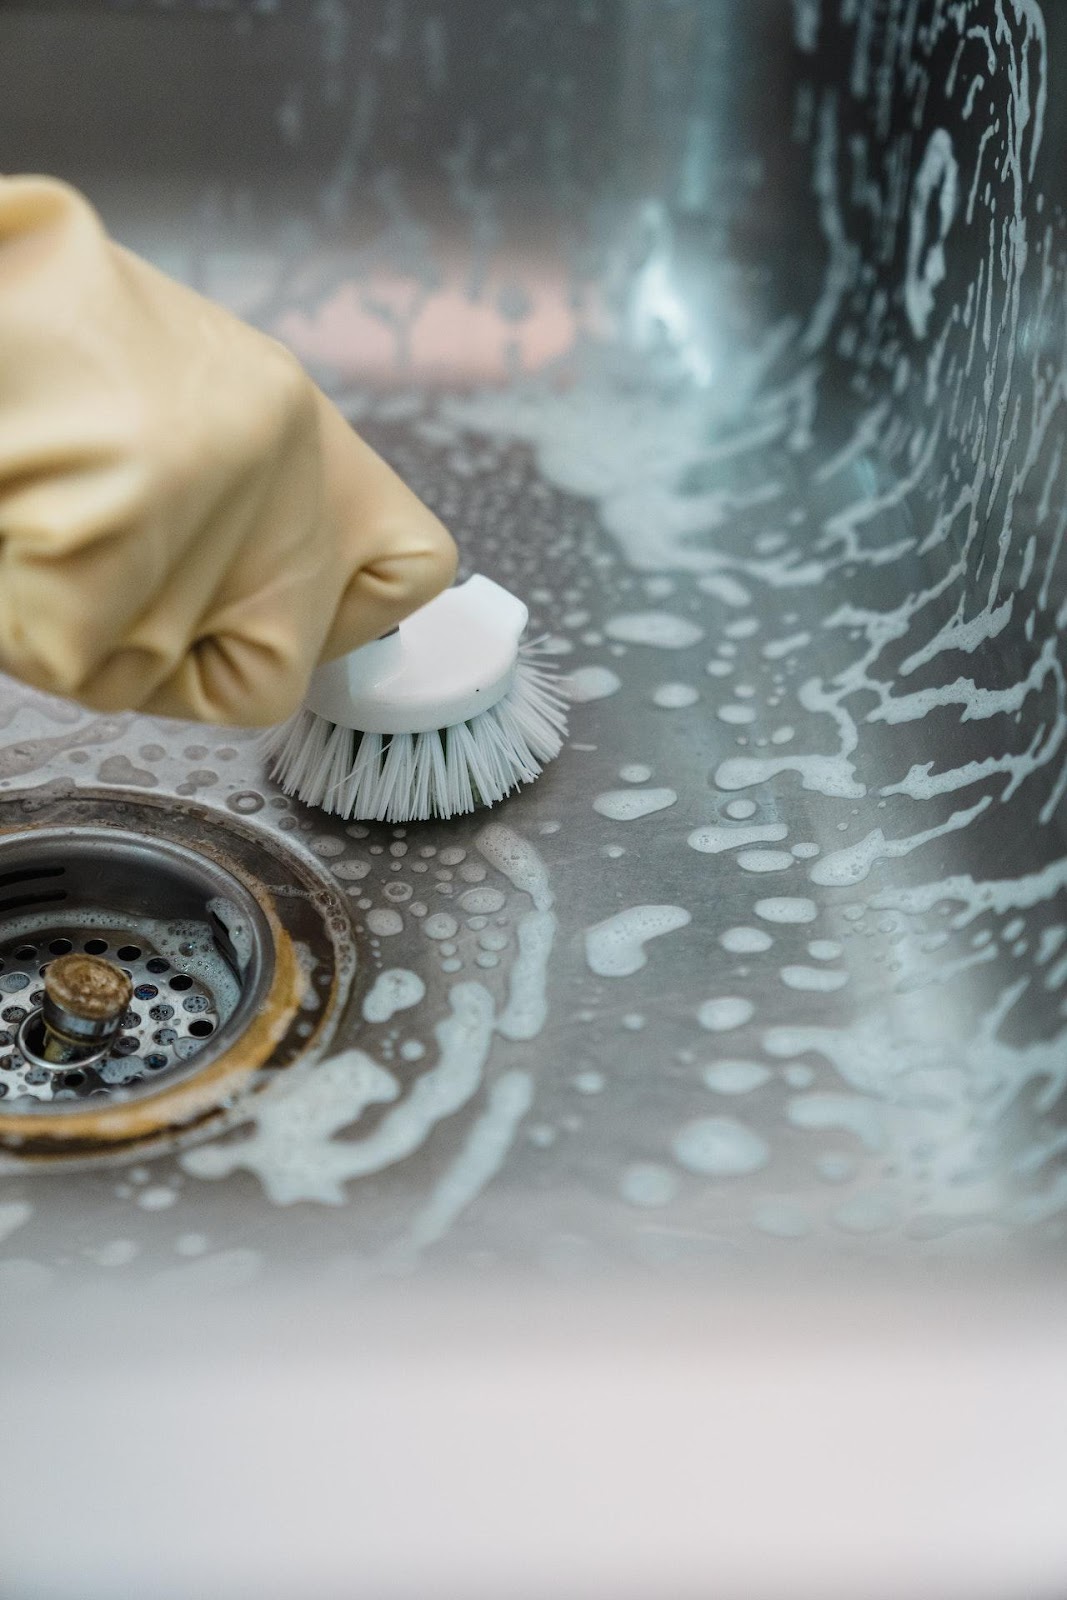 Drain Cleaning in Milton: Tips to Keep Your Plumbing System Flowing Smoothly